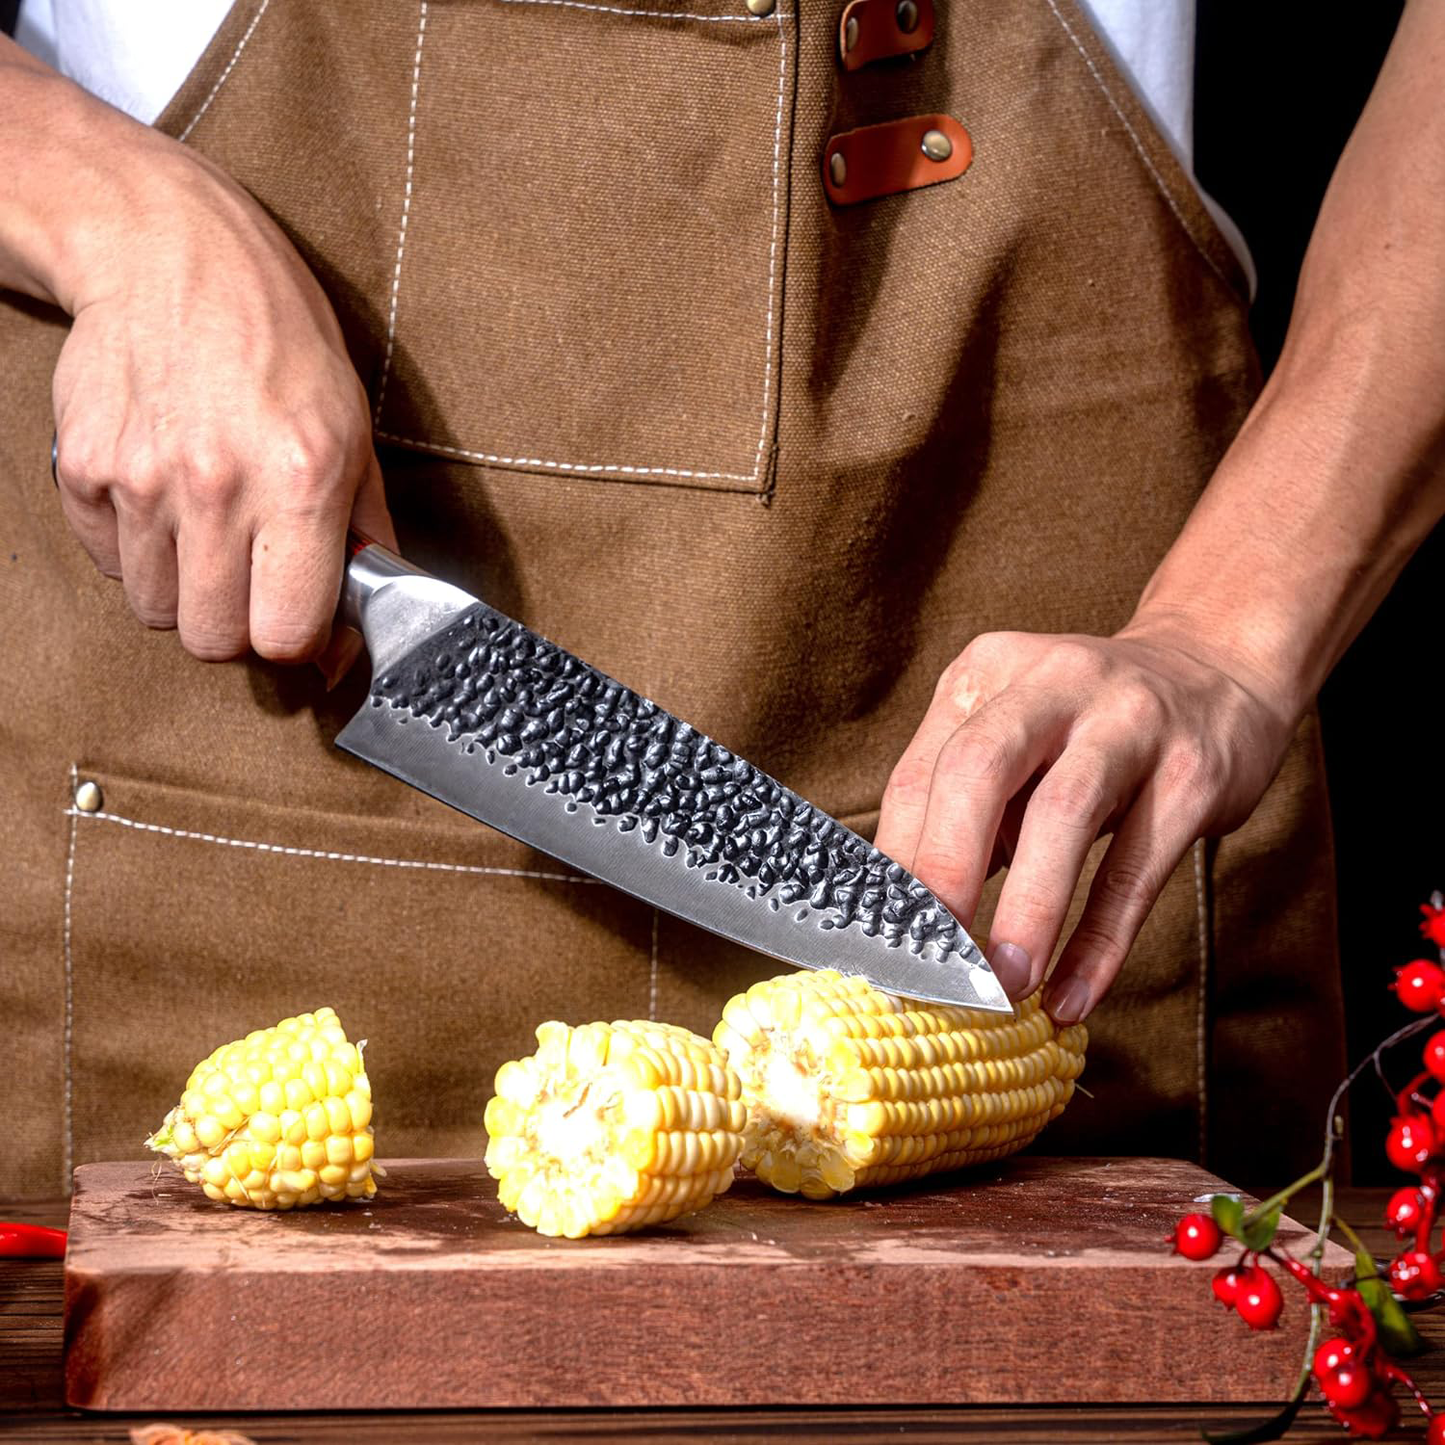 KD Professional 8-Inch Japanese Chef Knife: Precision in the Kitchen